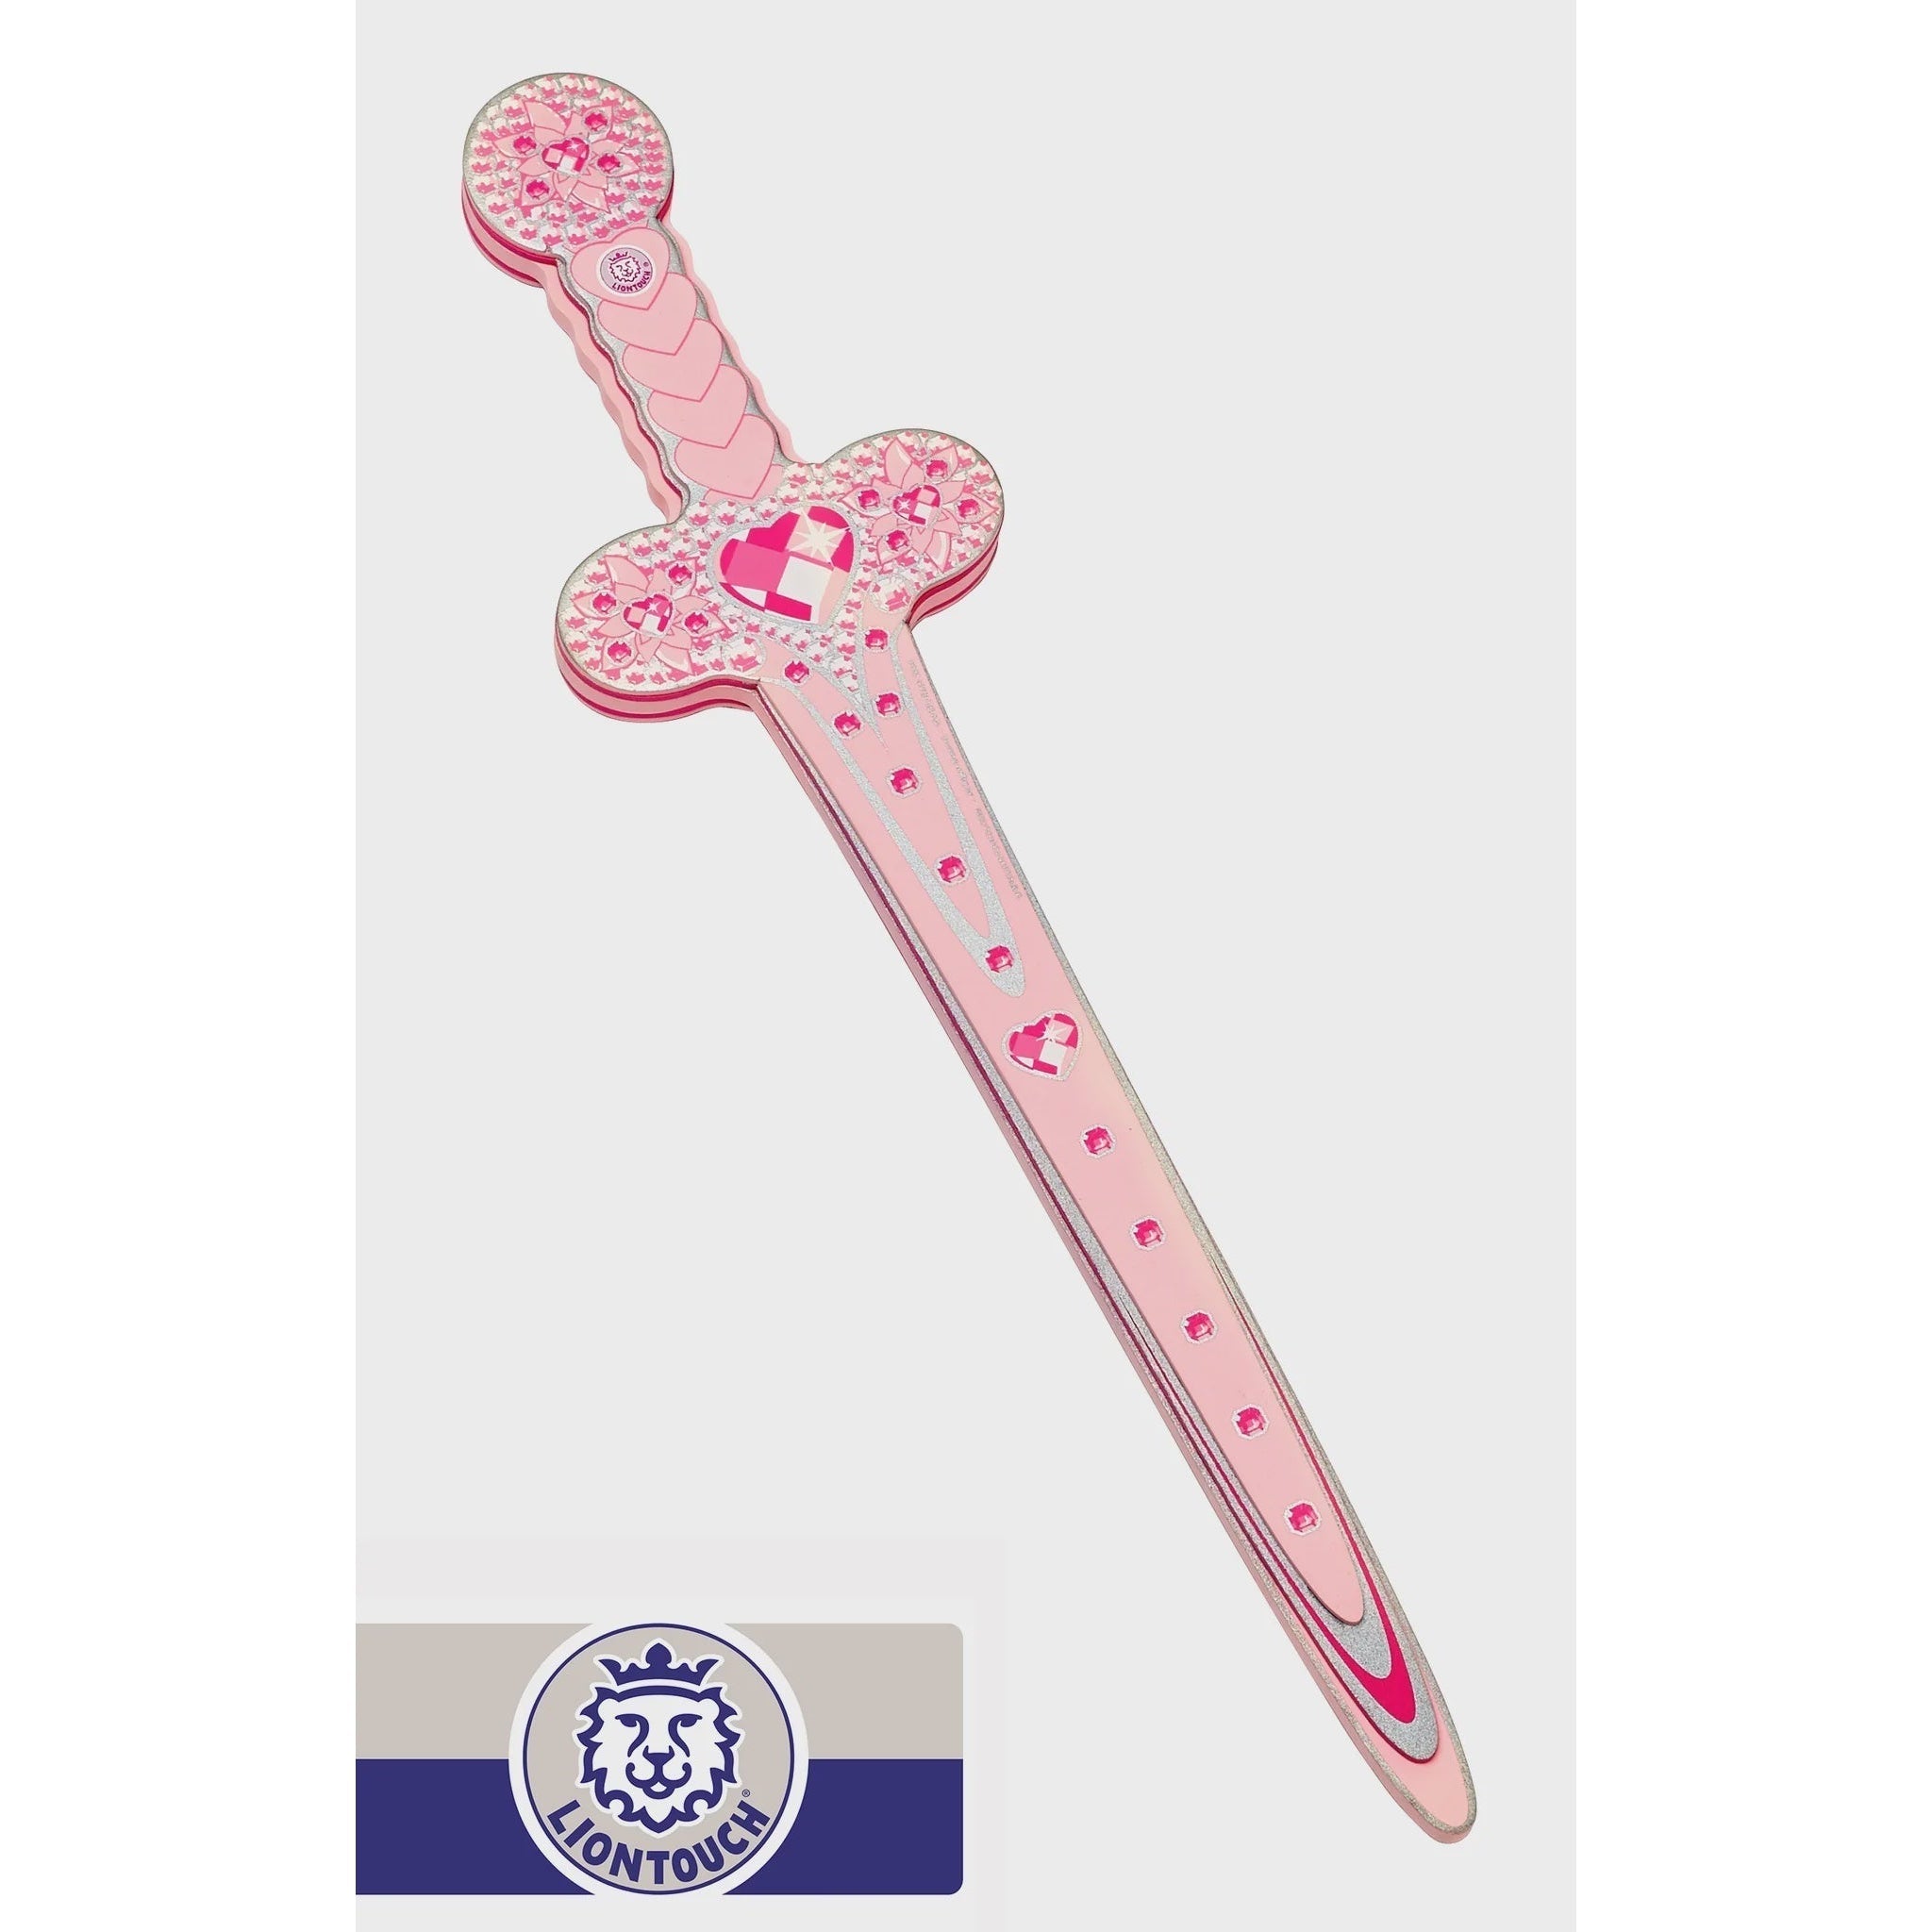 Liontouch-Liontouch Princess Sweet Heart Sword-250-Legacy Toys